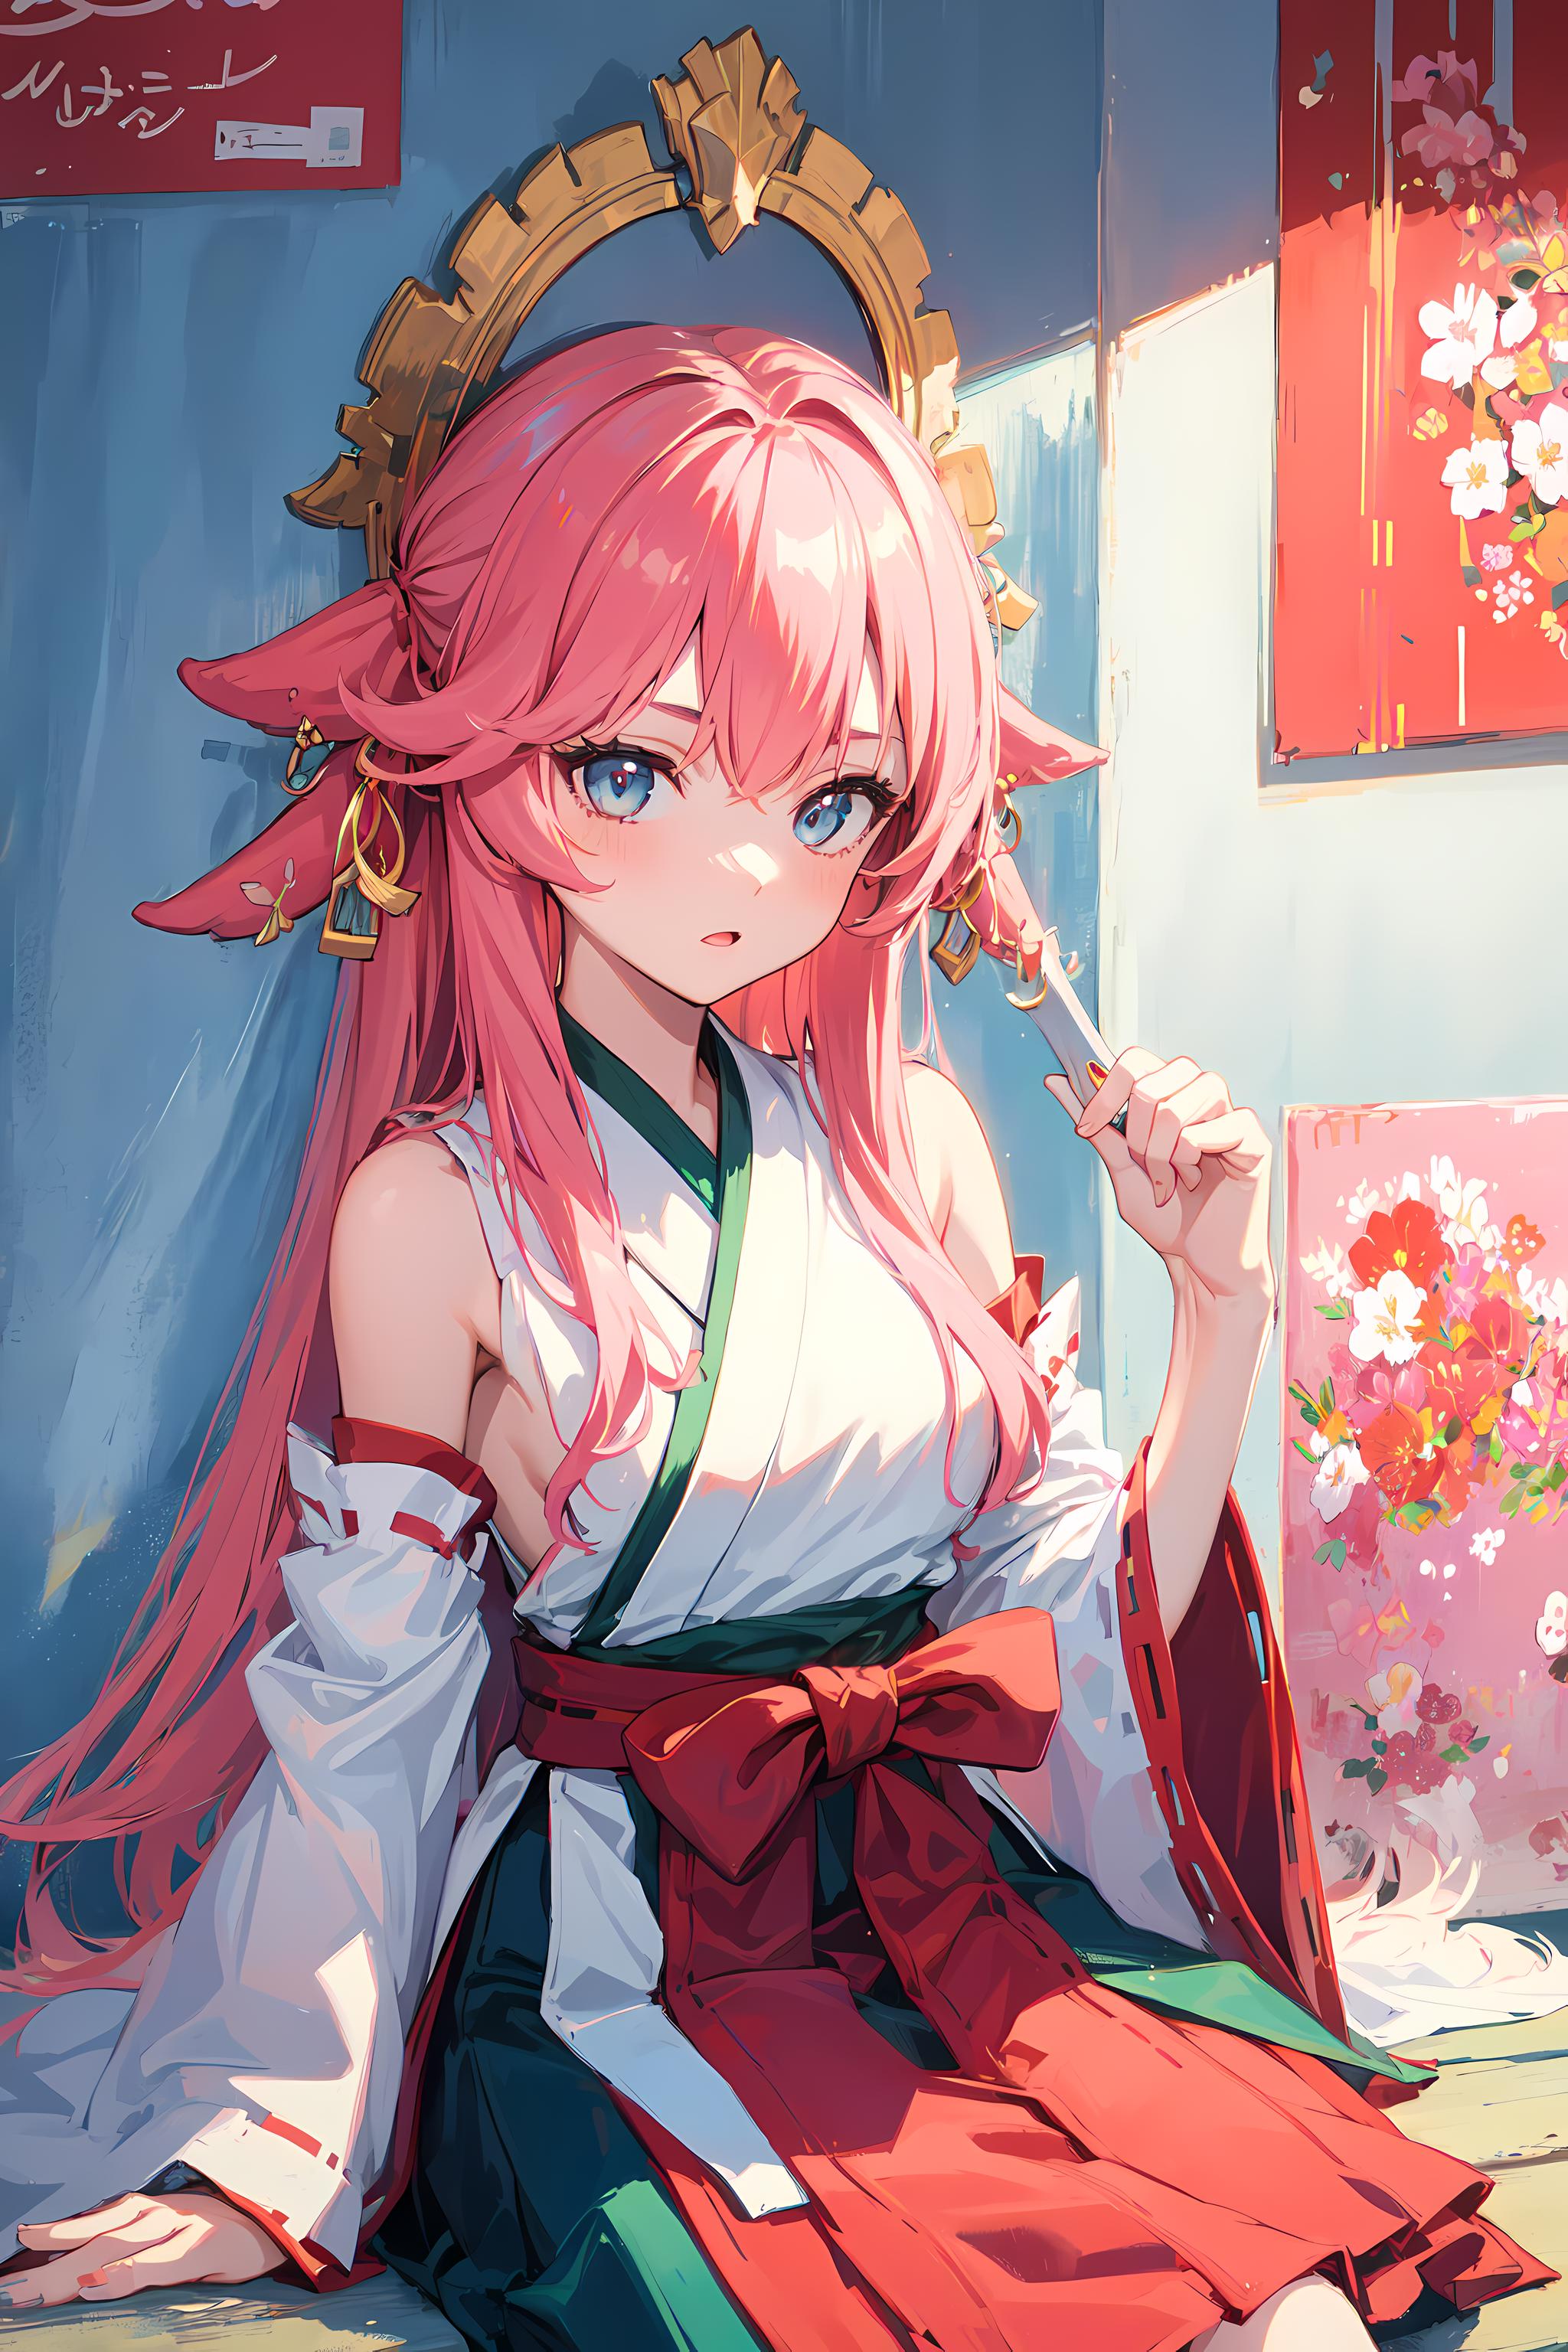 A pink and white anime girl with a bow in her hair holding a paintbrush.